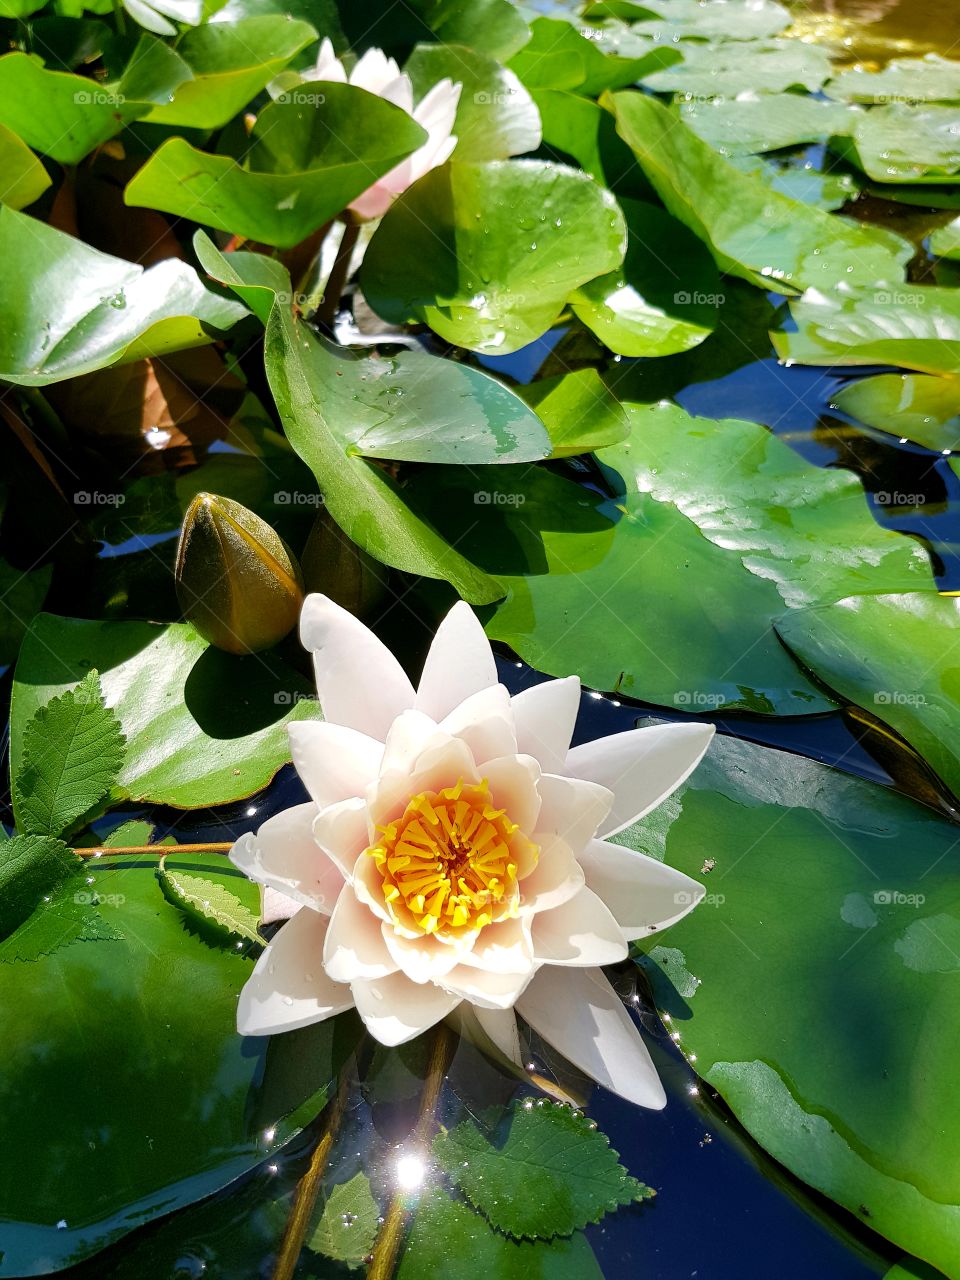 Water lily, beautiful flowers, summer time 🌞🌞🌞